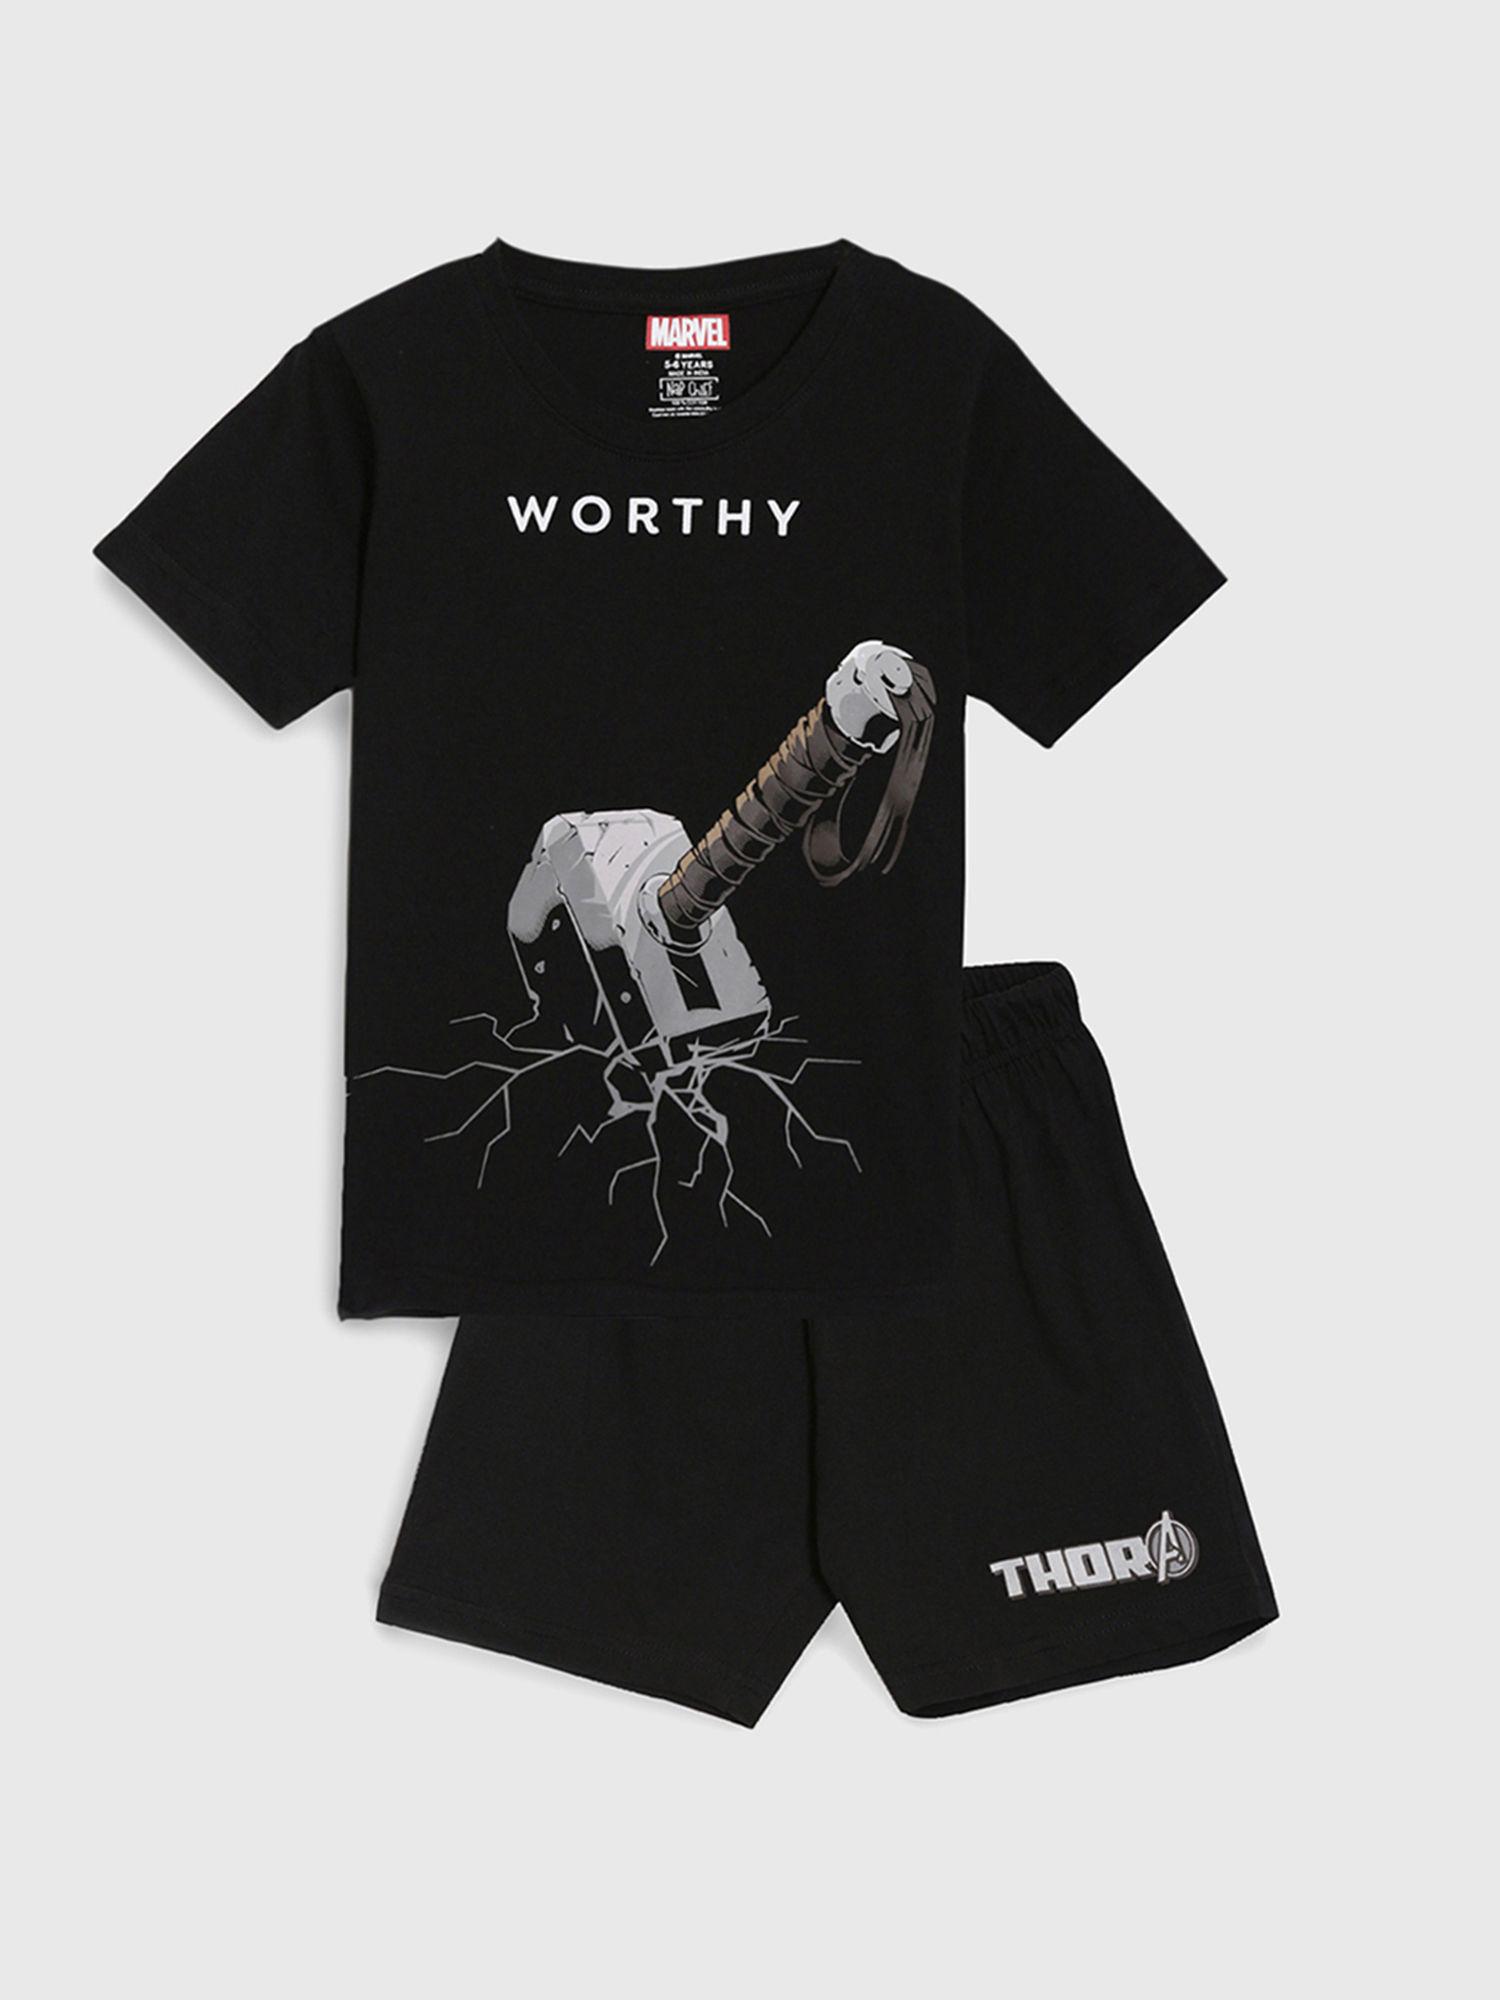 thor worthy t-shirt and shorts pure cotton half sleeve - black (set of 2)